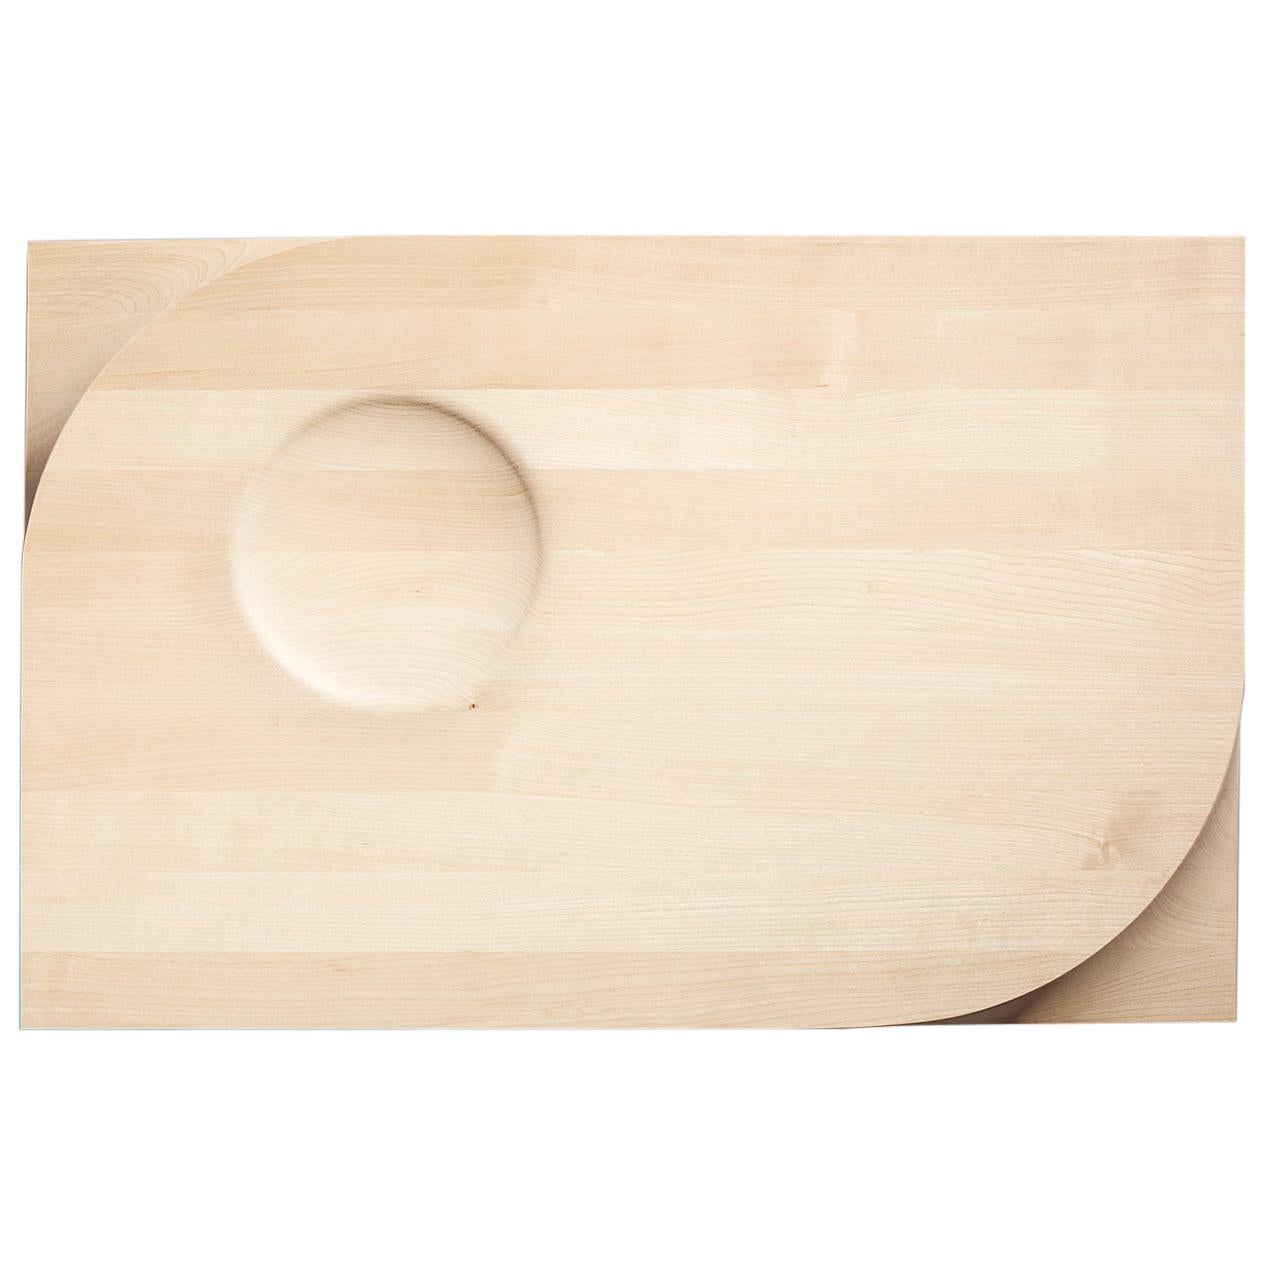 Two-sided Maple Wood Cutting Board and Serving Plate, Rettangolo, Made in Italy For Sale